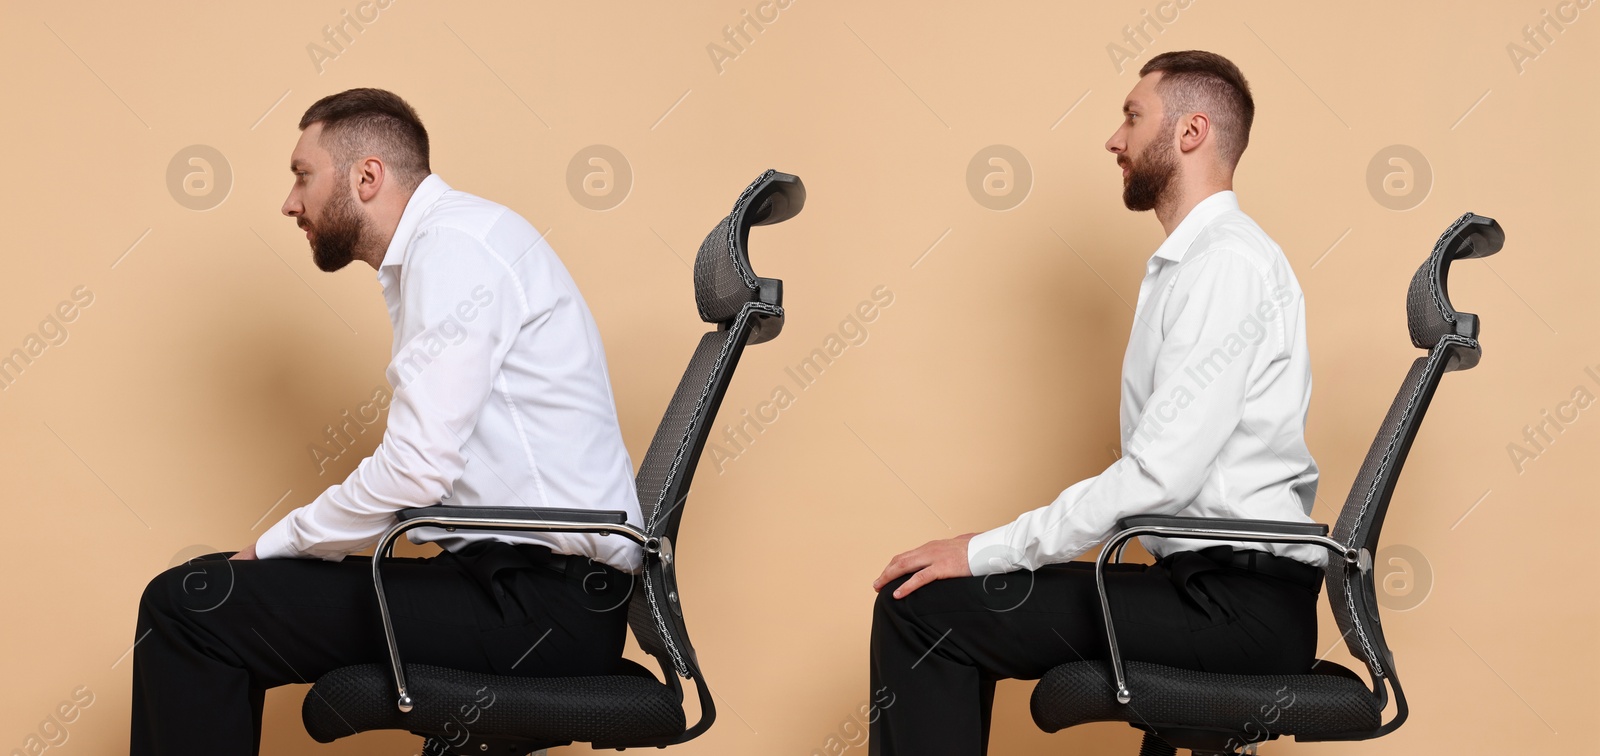 Image of Man with poor and good posture sitting on chair against beige background. Collage of photos